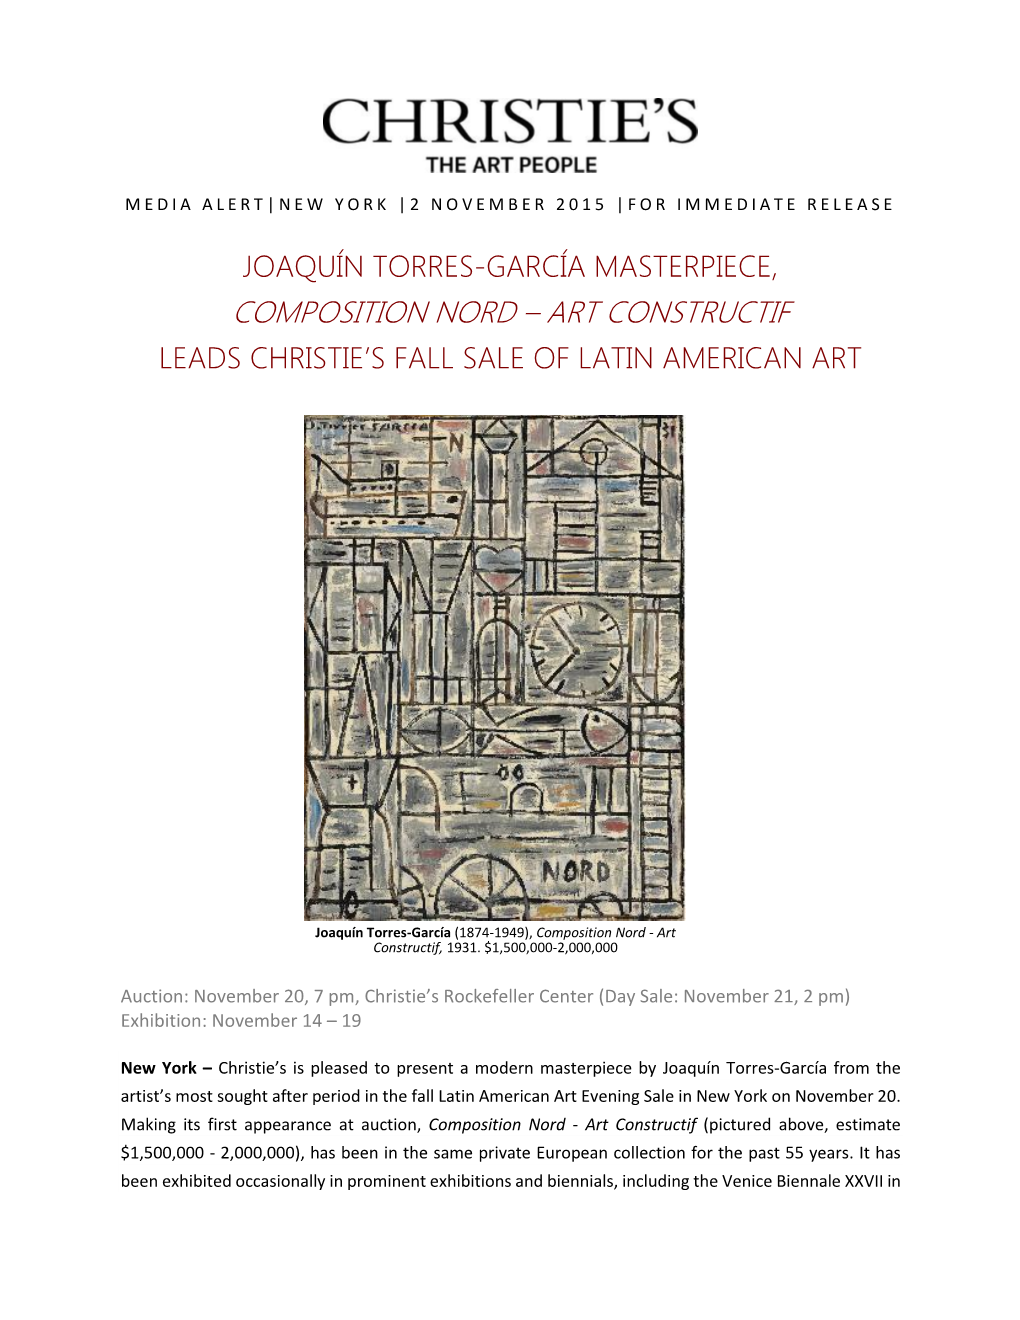 Composition Nord – Art Constructif Leads Christie’S Fall Sale of Latin American Art